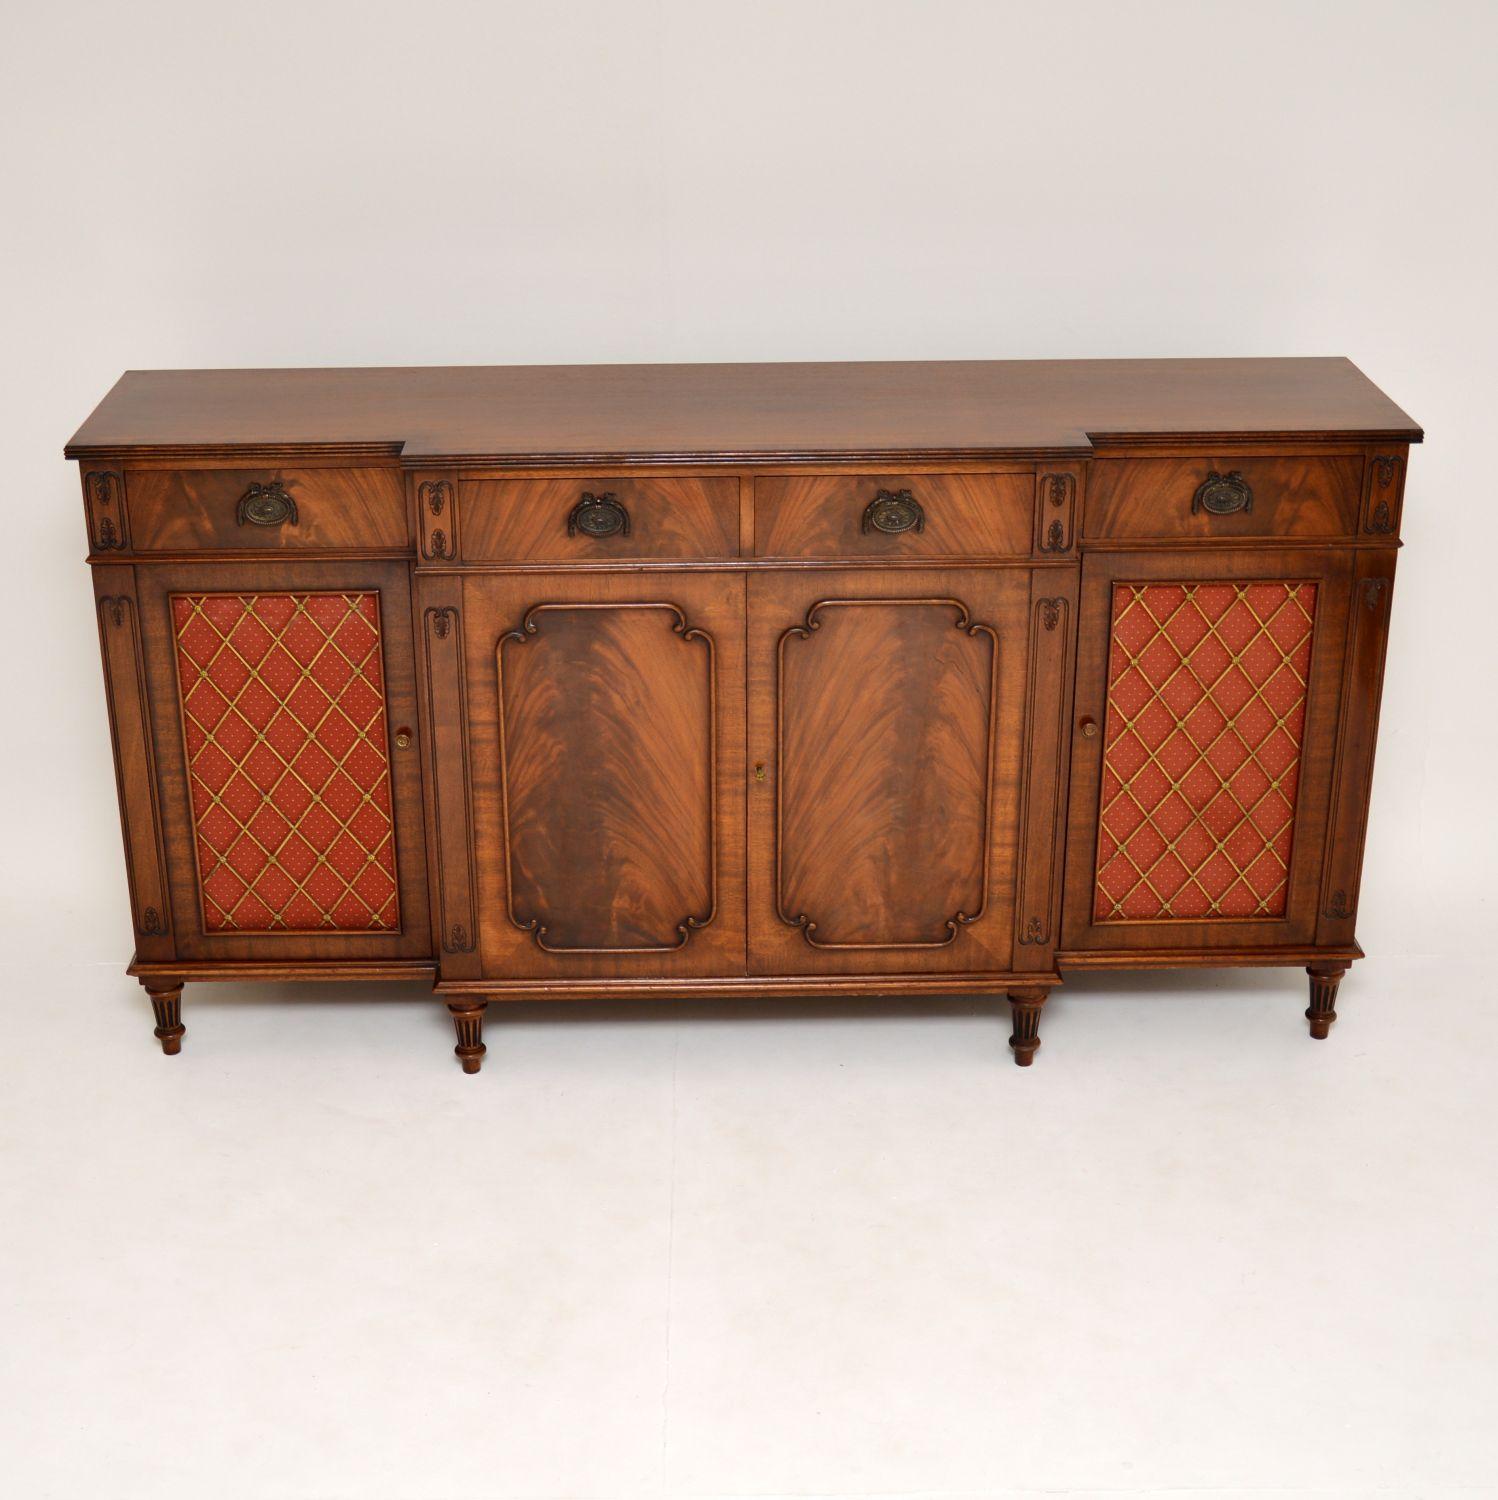 A very impressive antique Regency style grill front sideboard in mahogany. This dates from circa 1950s.

It is of outstanding quality, with stunning flame mahogany veneers and beautifully moulded mahogany borders on the doors. The brass grill